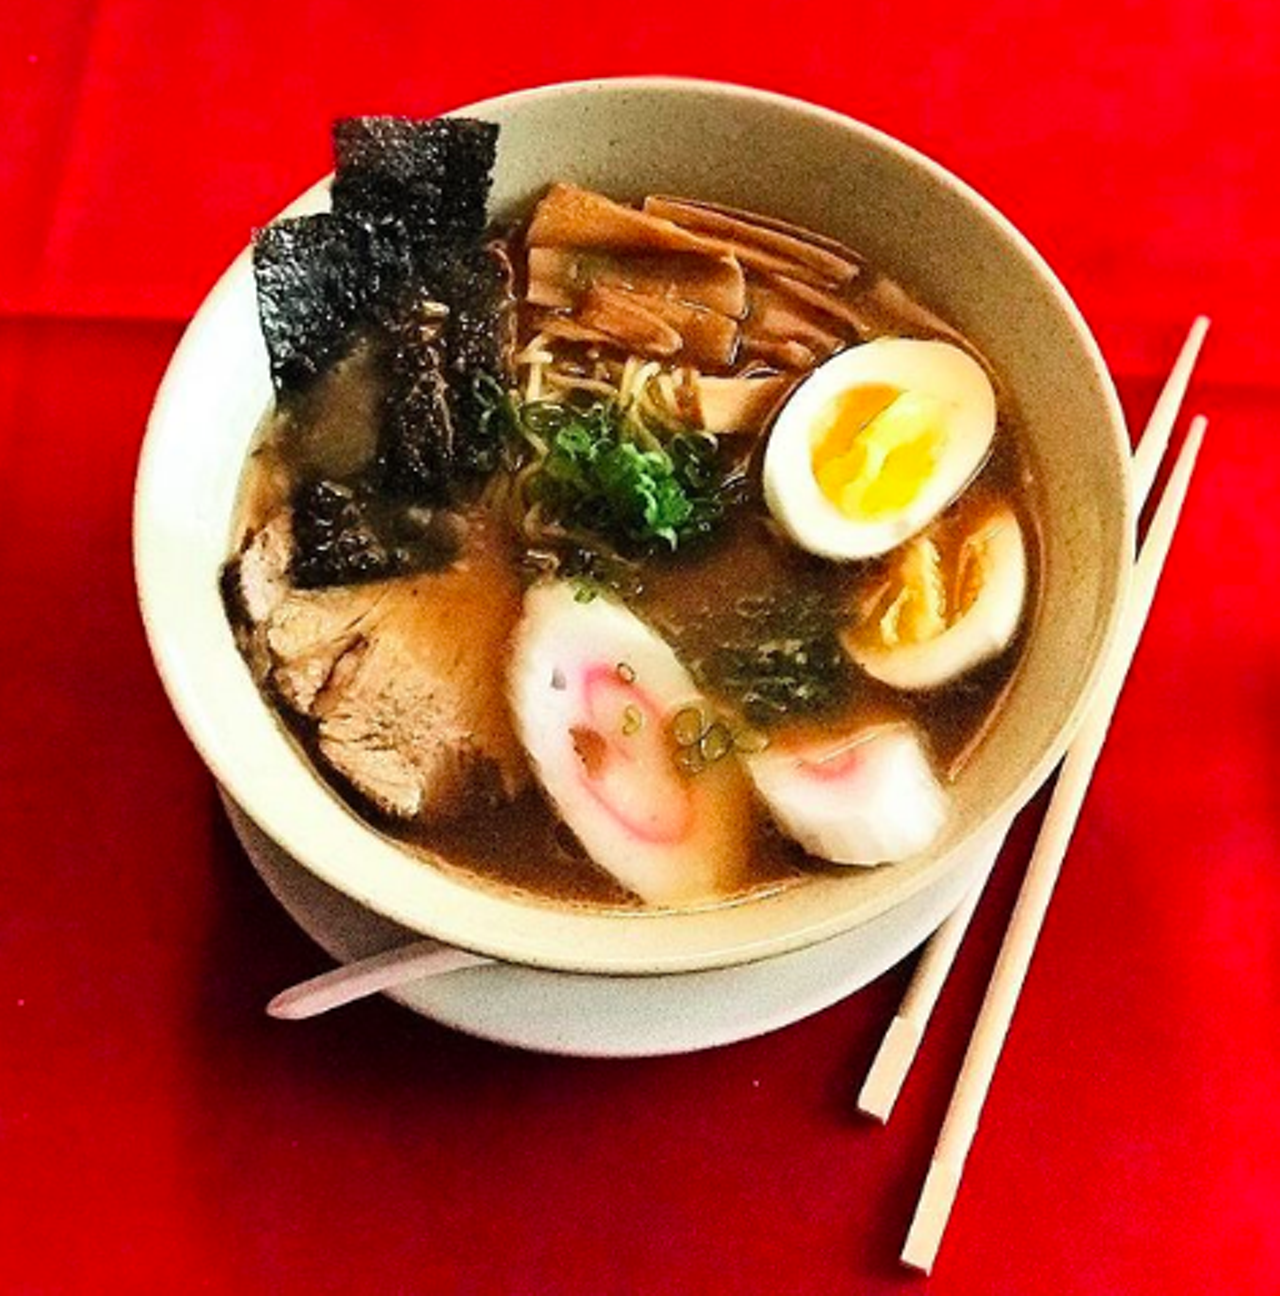 Niki’s Tokyo Inn
819 West Hildebrand Avenue, (210) 736-5471
With the Japanese aesthetic checking all the boxes for super authentic dining experience, Niki’s also delivers for tasty noodles. Though specializing in sushi, this Hildebrand restaurant serves up ramen that consistently hits the spot.
Photo via Instagram / wheresthefood.sa